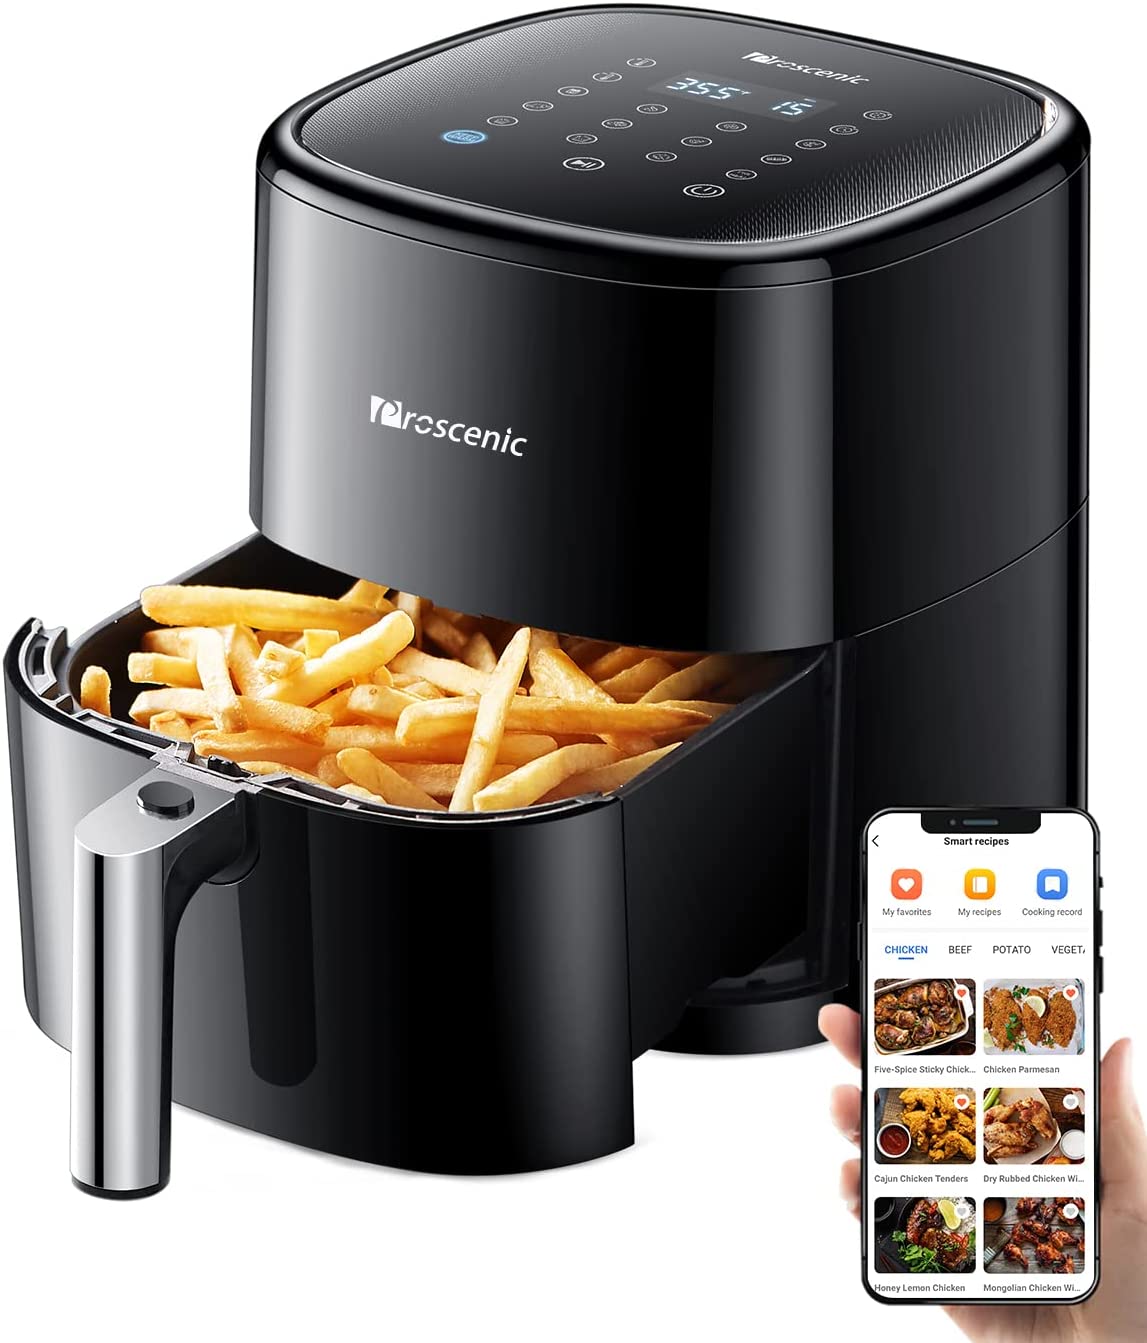 Proscenic T22 Air Fryer, 5.3 QT, 13-in-1 Oilless Small Oven with T22, Black